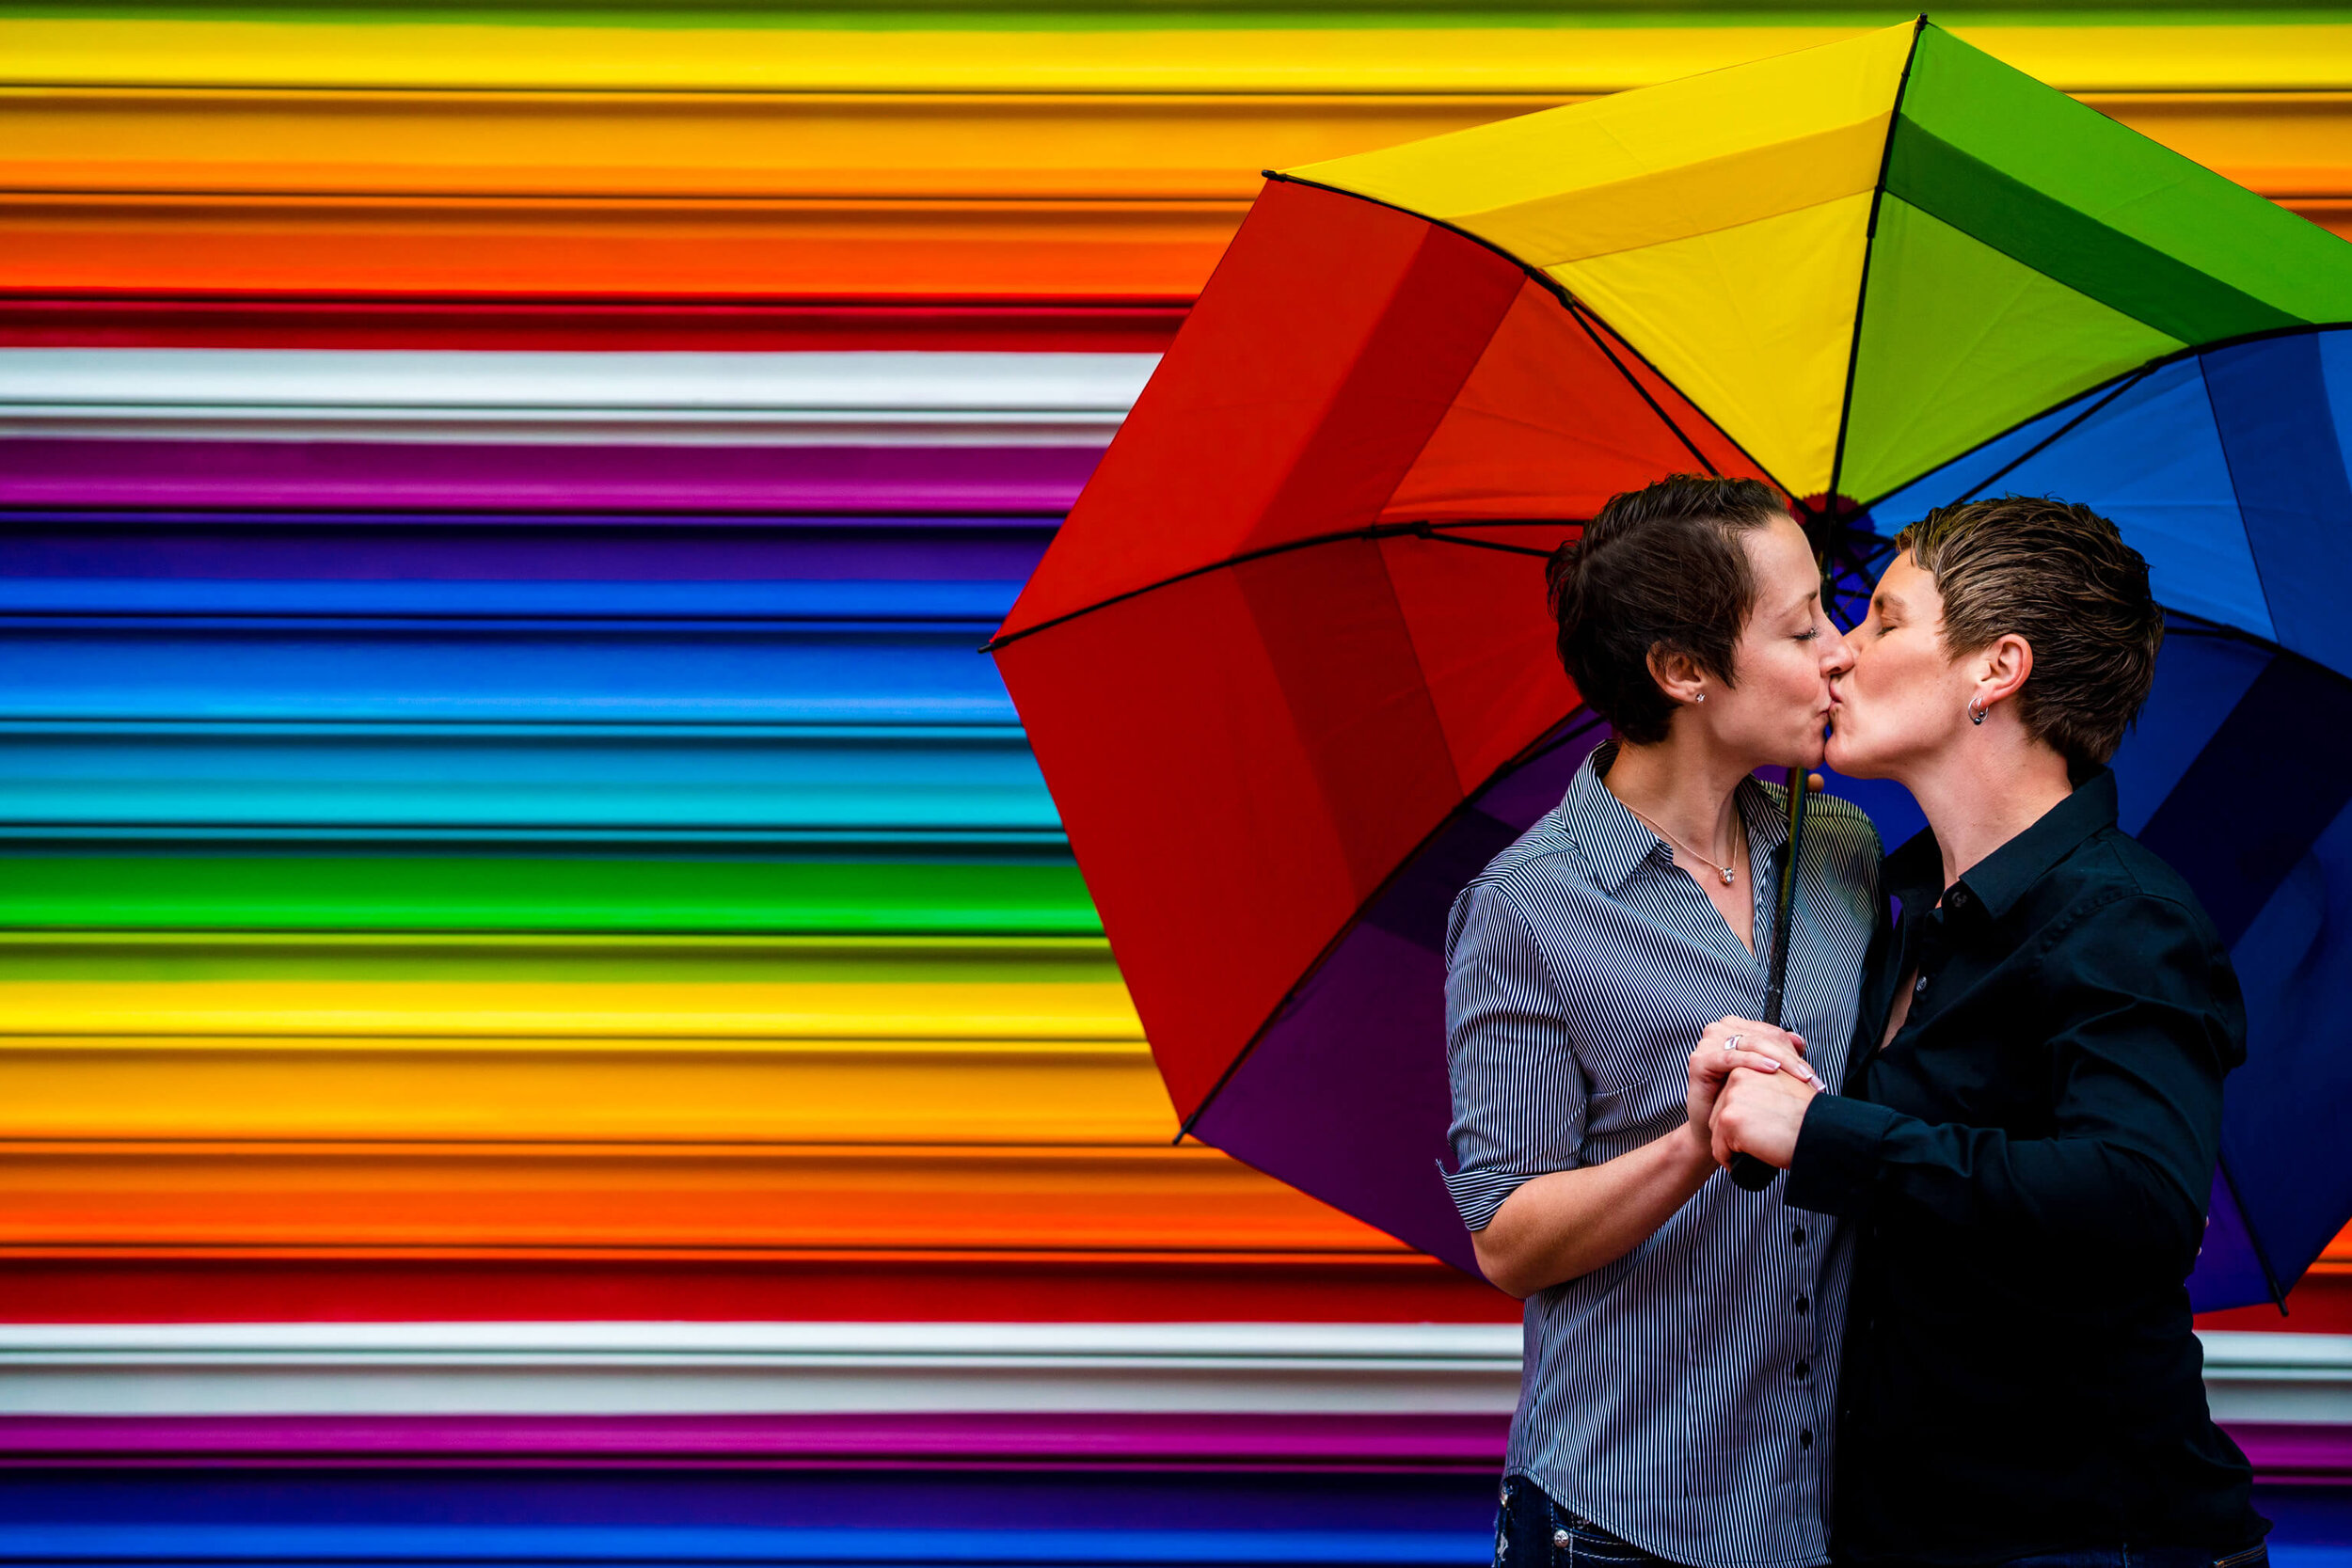 4-love-mural-washington-dc-blagden-alley-two-brides-same-sex-engagement-session-rainbow-wall-umbrella-Edit-photography-by-bee-two-sweet.jpg